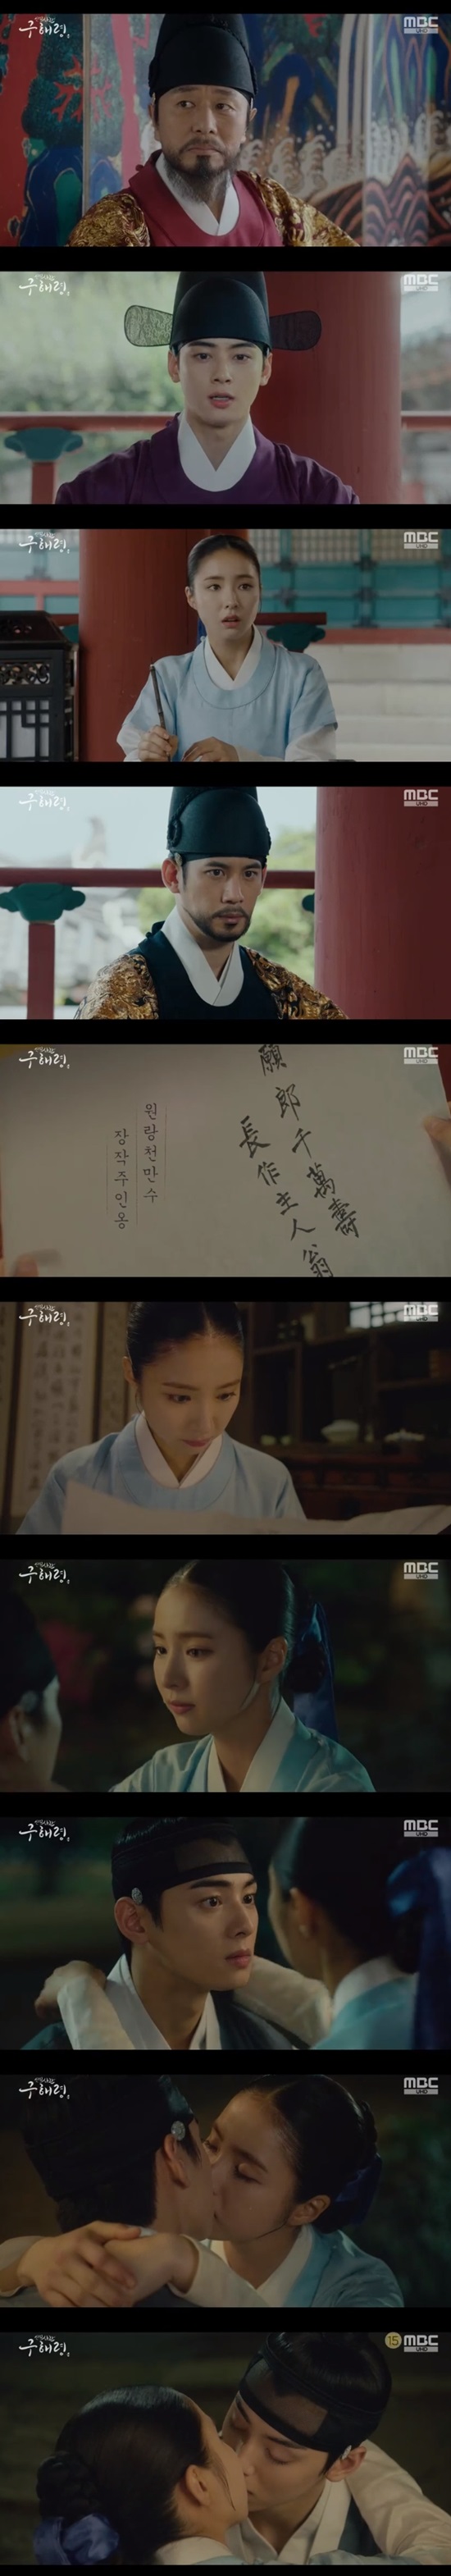 Shin Se-kyung read Cha Eun-woos poem and kissed first.In the MBC drama Rookie Historian Goe-ryung, which was broadcast on August 22 (played by Kim Ho-soo/directed by Kang Il-soo Han Hyun-hee)Rookie Historian Goo Hae-ryung (Shin Se-kyung) watched Lee Rims poem and was thrilled to love. I kissed him with Confessions.Rookie Historian Goo Hae-ryung (Shin Se-kyung) began to record the Haru of the entrance examination king (Kim Min-sang) from dawn, depending on the name.Unlike usual, the king sent a busy Haru from the greetings of Lim (Kim Yeo-jin), and deliberately harassed the officer Rookie Historian Goo Hae-ryung.In response, Daewon Daegun Yirim (Cha Eun-woo) pointed out to the king that it corresponds to three of the army meat and meat.The king laughed at the sight of Min Ik-pyeong (Choi Deok-moon) and predicted the end of the story with a meaningful saying, I can not cheat blood.Rookie Historian Goo Hae-ryung then struggled with instructions to take the bowel directly to the front feeling while watching and recording the kings eating and bowel movements.Min Woo-won (Lee Ji-hoon) apologized, saying, I am sorry for causing such a hardship.Rookie Historian Goo Hae-ryung shouted that he was confident of his physical strength, and the king was tired first, as Rookie Historian Goo Hae-ryung said.Lee Lim secretly snacked for Rookie Historian Goo Hae-ryung, who could not eat breakfast and started his early morning, and Seja Lee Jin (Park Ki-woong) took the gap and went undercover and remembered the past that he lived as the eldest son of Hamyoung-gun.Lee Jin presented the danggi to Song Sa-hee (Park Ji-hyun), who followed the undercover.The king asked Rookie Historian Goo Hae-ryung to be solo, and he suggested that he would do anything if he overheard the conversation between himself and Min-pyeong and erased the enemy.Rookie Historian Goo Hae-ryung said that he did not hear anything that day and that he had not heard anything. He said that he would record the good image of the king who tried to persuade himself to the end by collecting the wrong name.The king gave a schoolbook to allow the officers to enter any place they wanted, and the officers cheered on the achievements of Rookie Historian Goo Hae-ryung.Rookie Historian Goo Hae-ryung had a dinner with his officers that night, and Irim was caught just after chasing the retired Rookie Historian Goo Hae-ryung.The officers only thought that the Grand Army was frosty and drank alcohol, and Rookie Historian Goo Hae-ryung ate the drink instead.Yoo Gyeong-sang